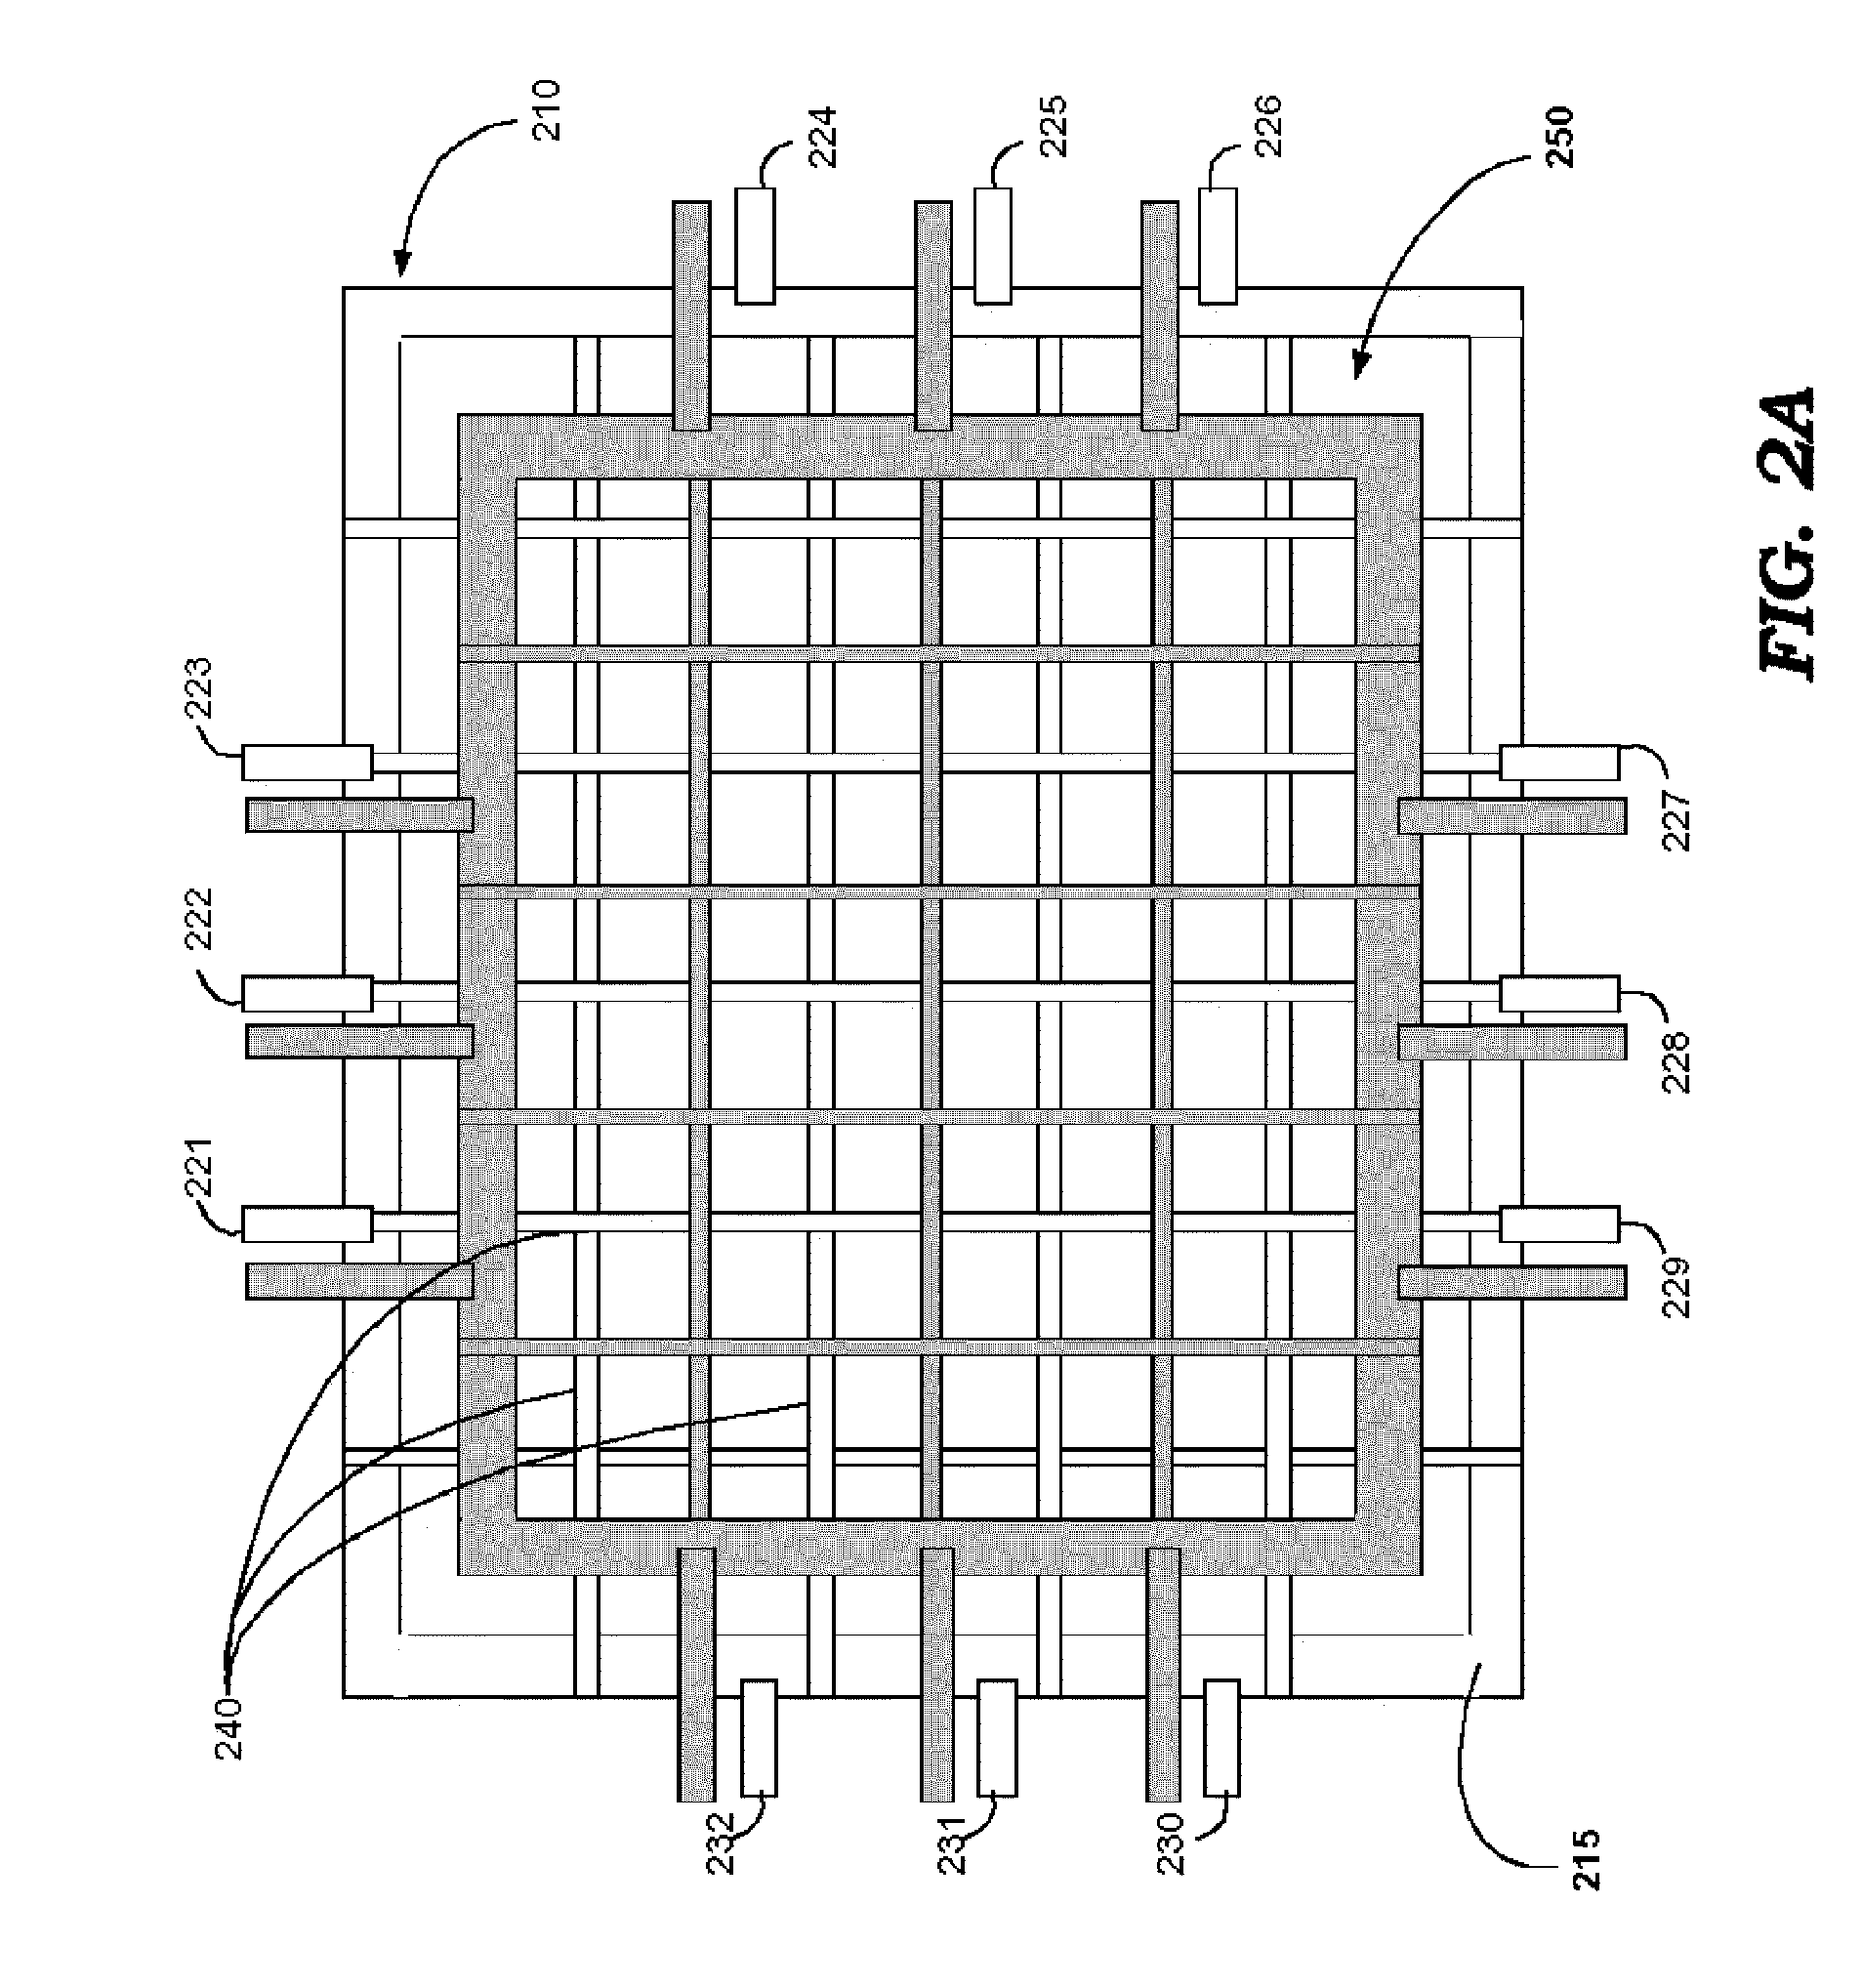 Power grid design in an integrated circuit